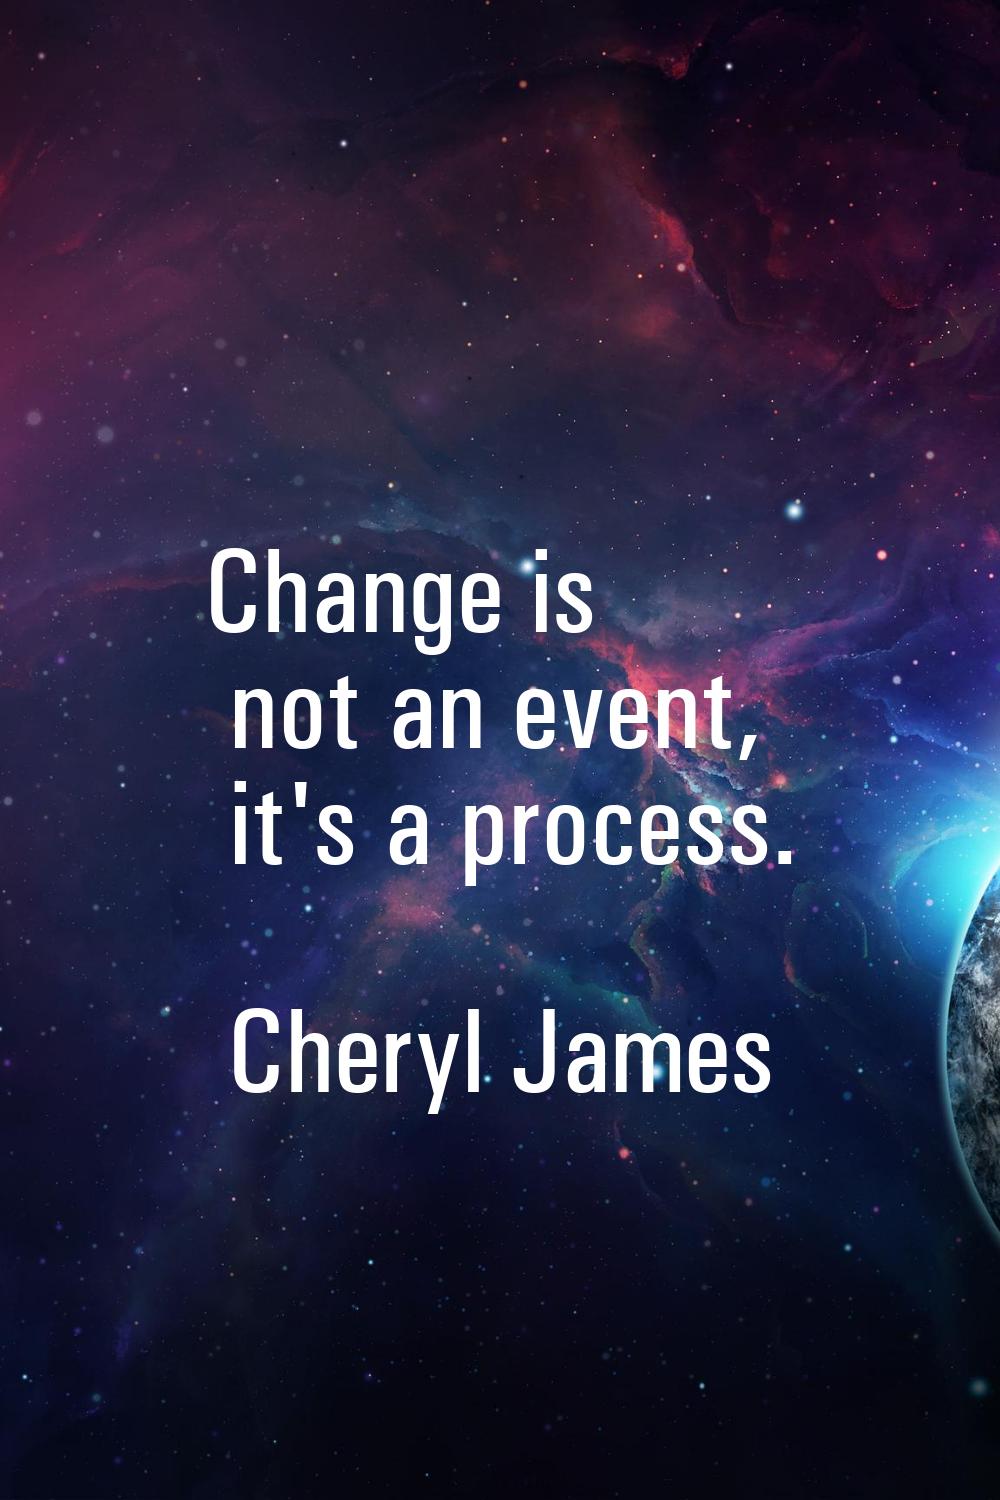 Change is not an event, it's a process.